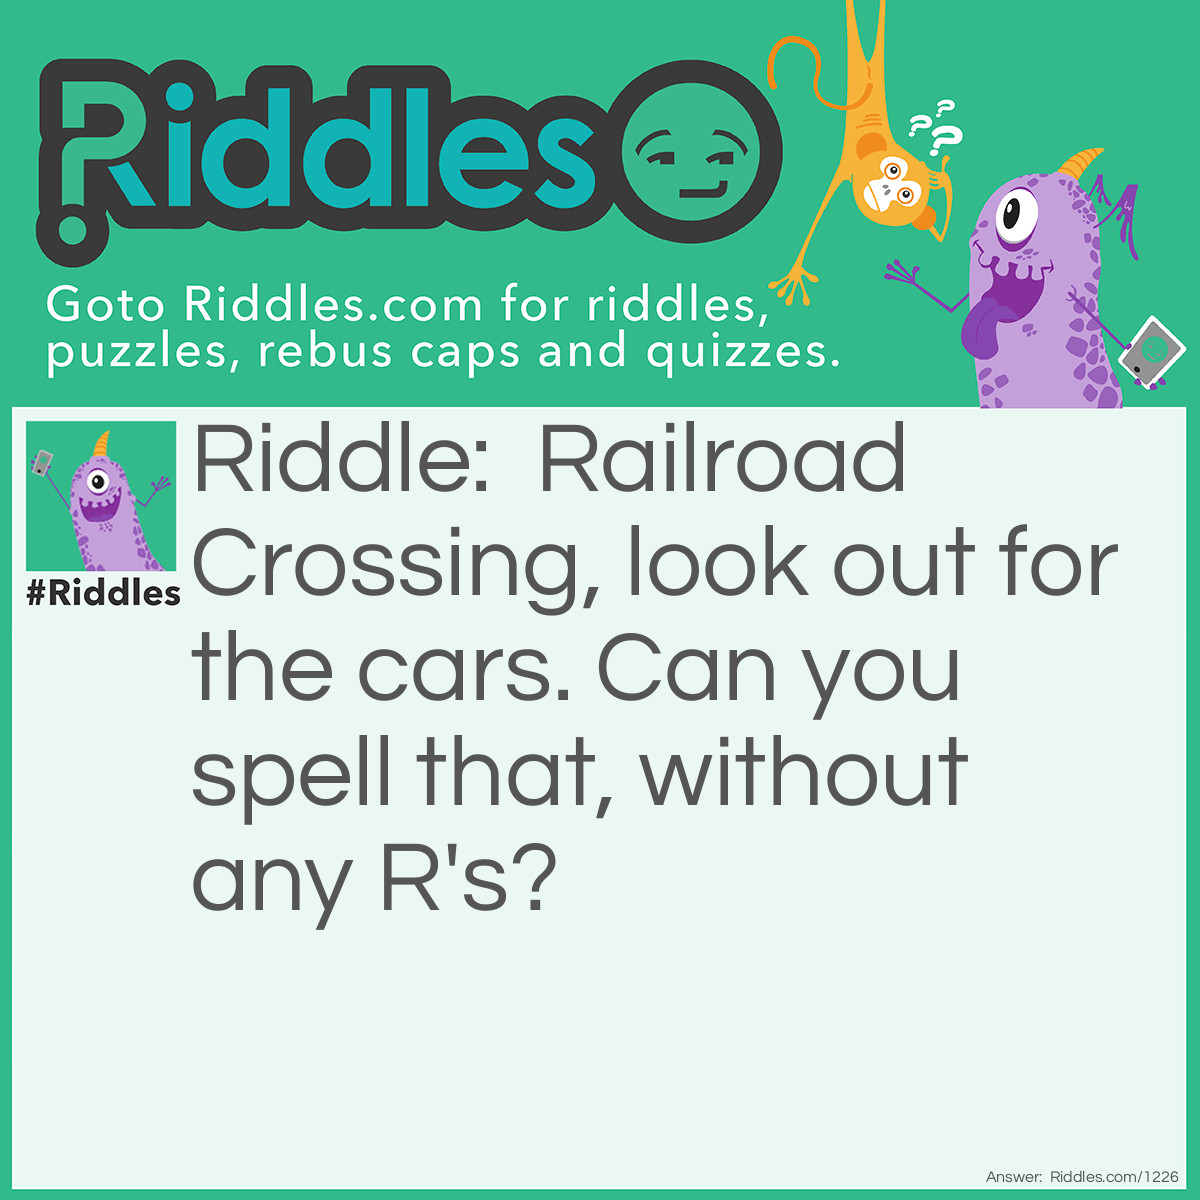 Riddle: Railroad Crossing, look out for the cars. Can you spell that, without any R's? Answer: That.